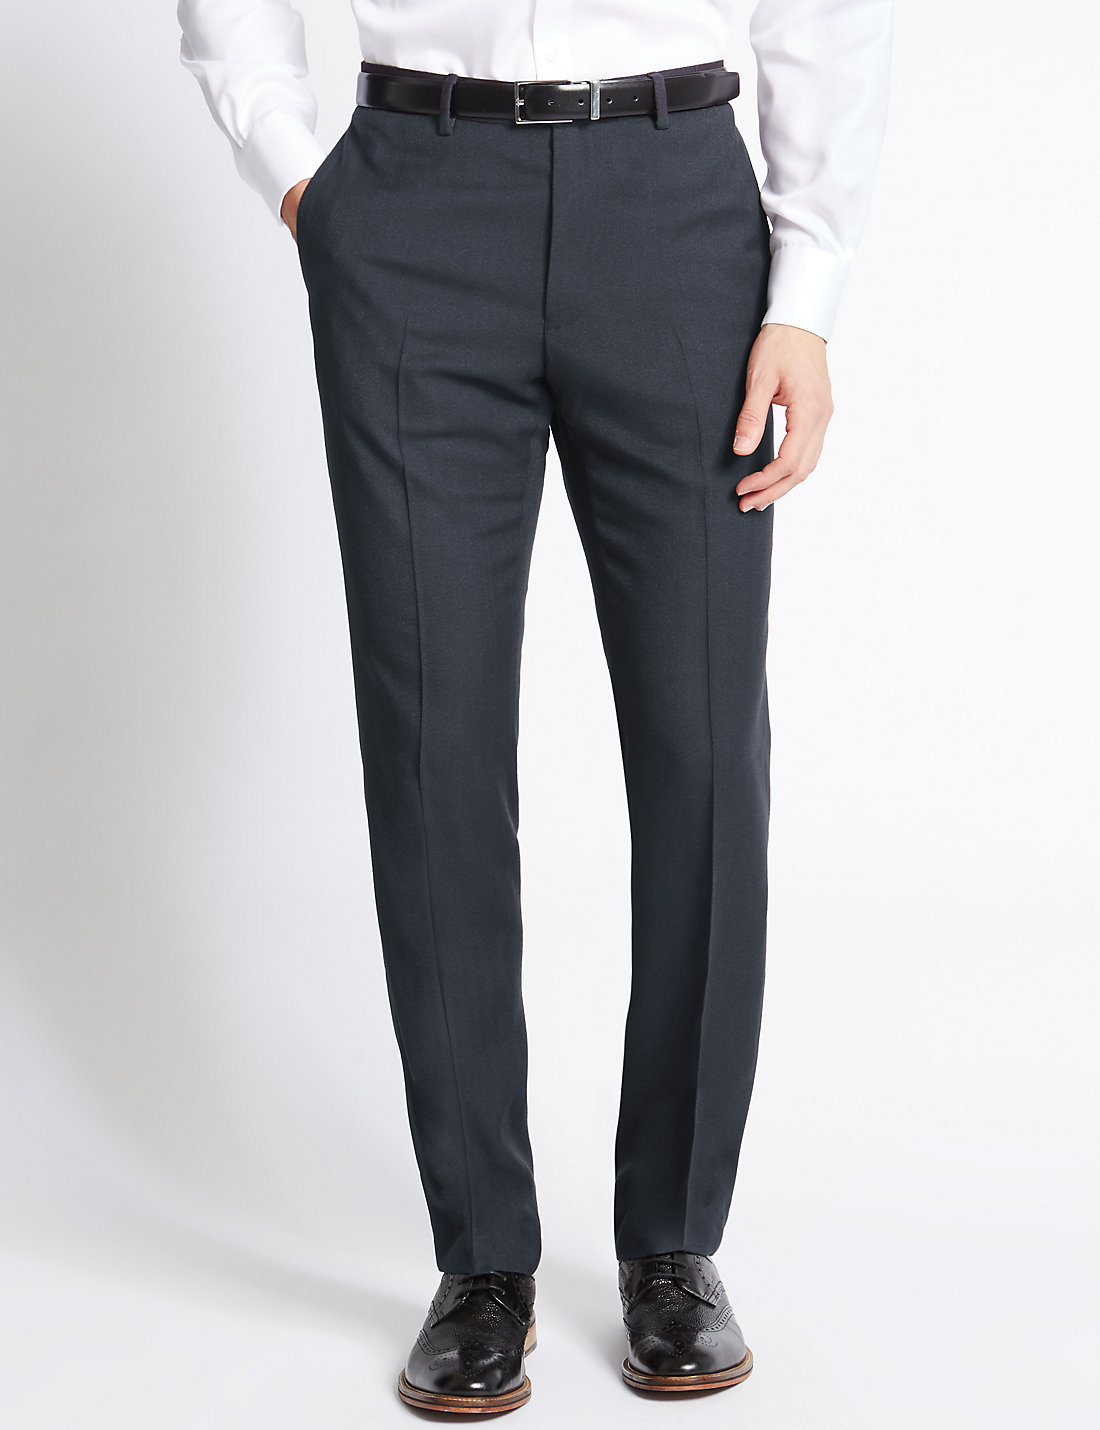 Marks and Spencer - - M&5 NAVY Tailored Fit Flat Front Trousers - Waist ...